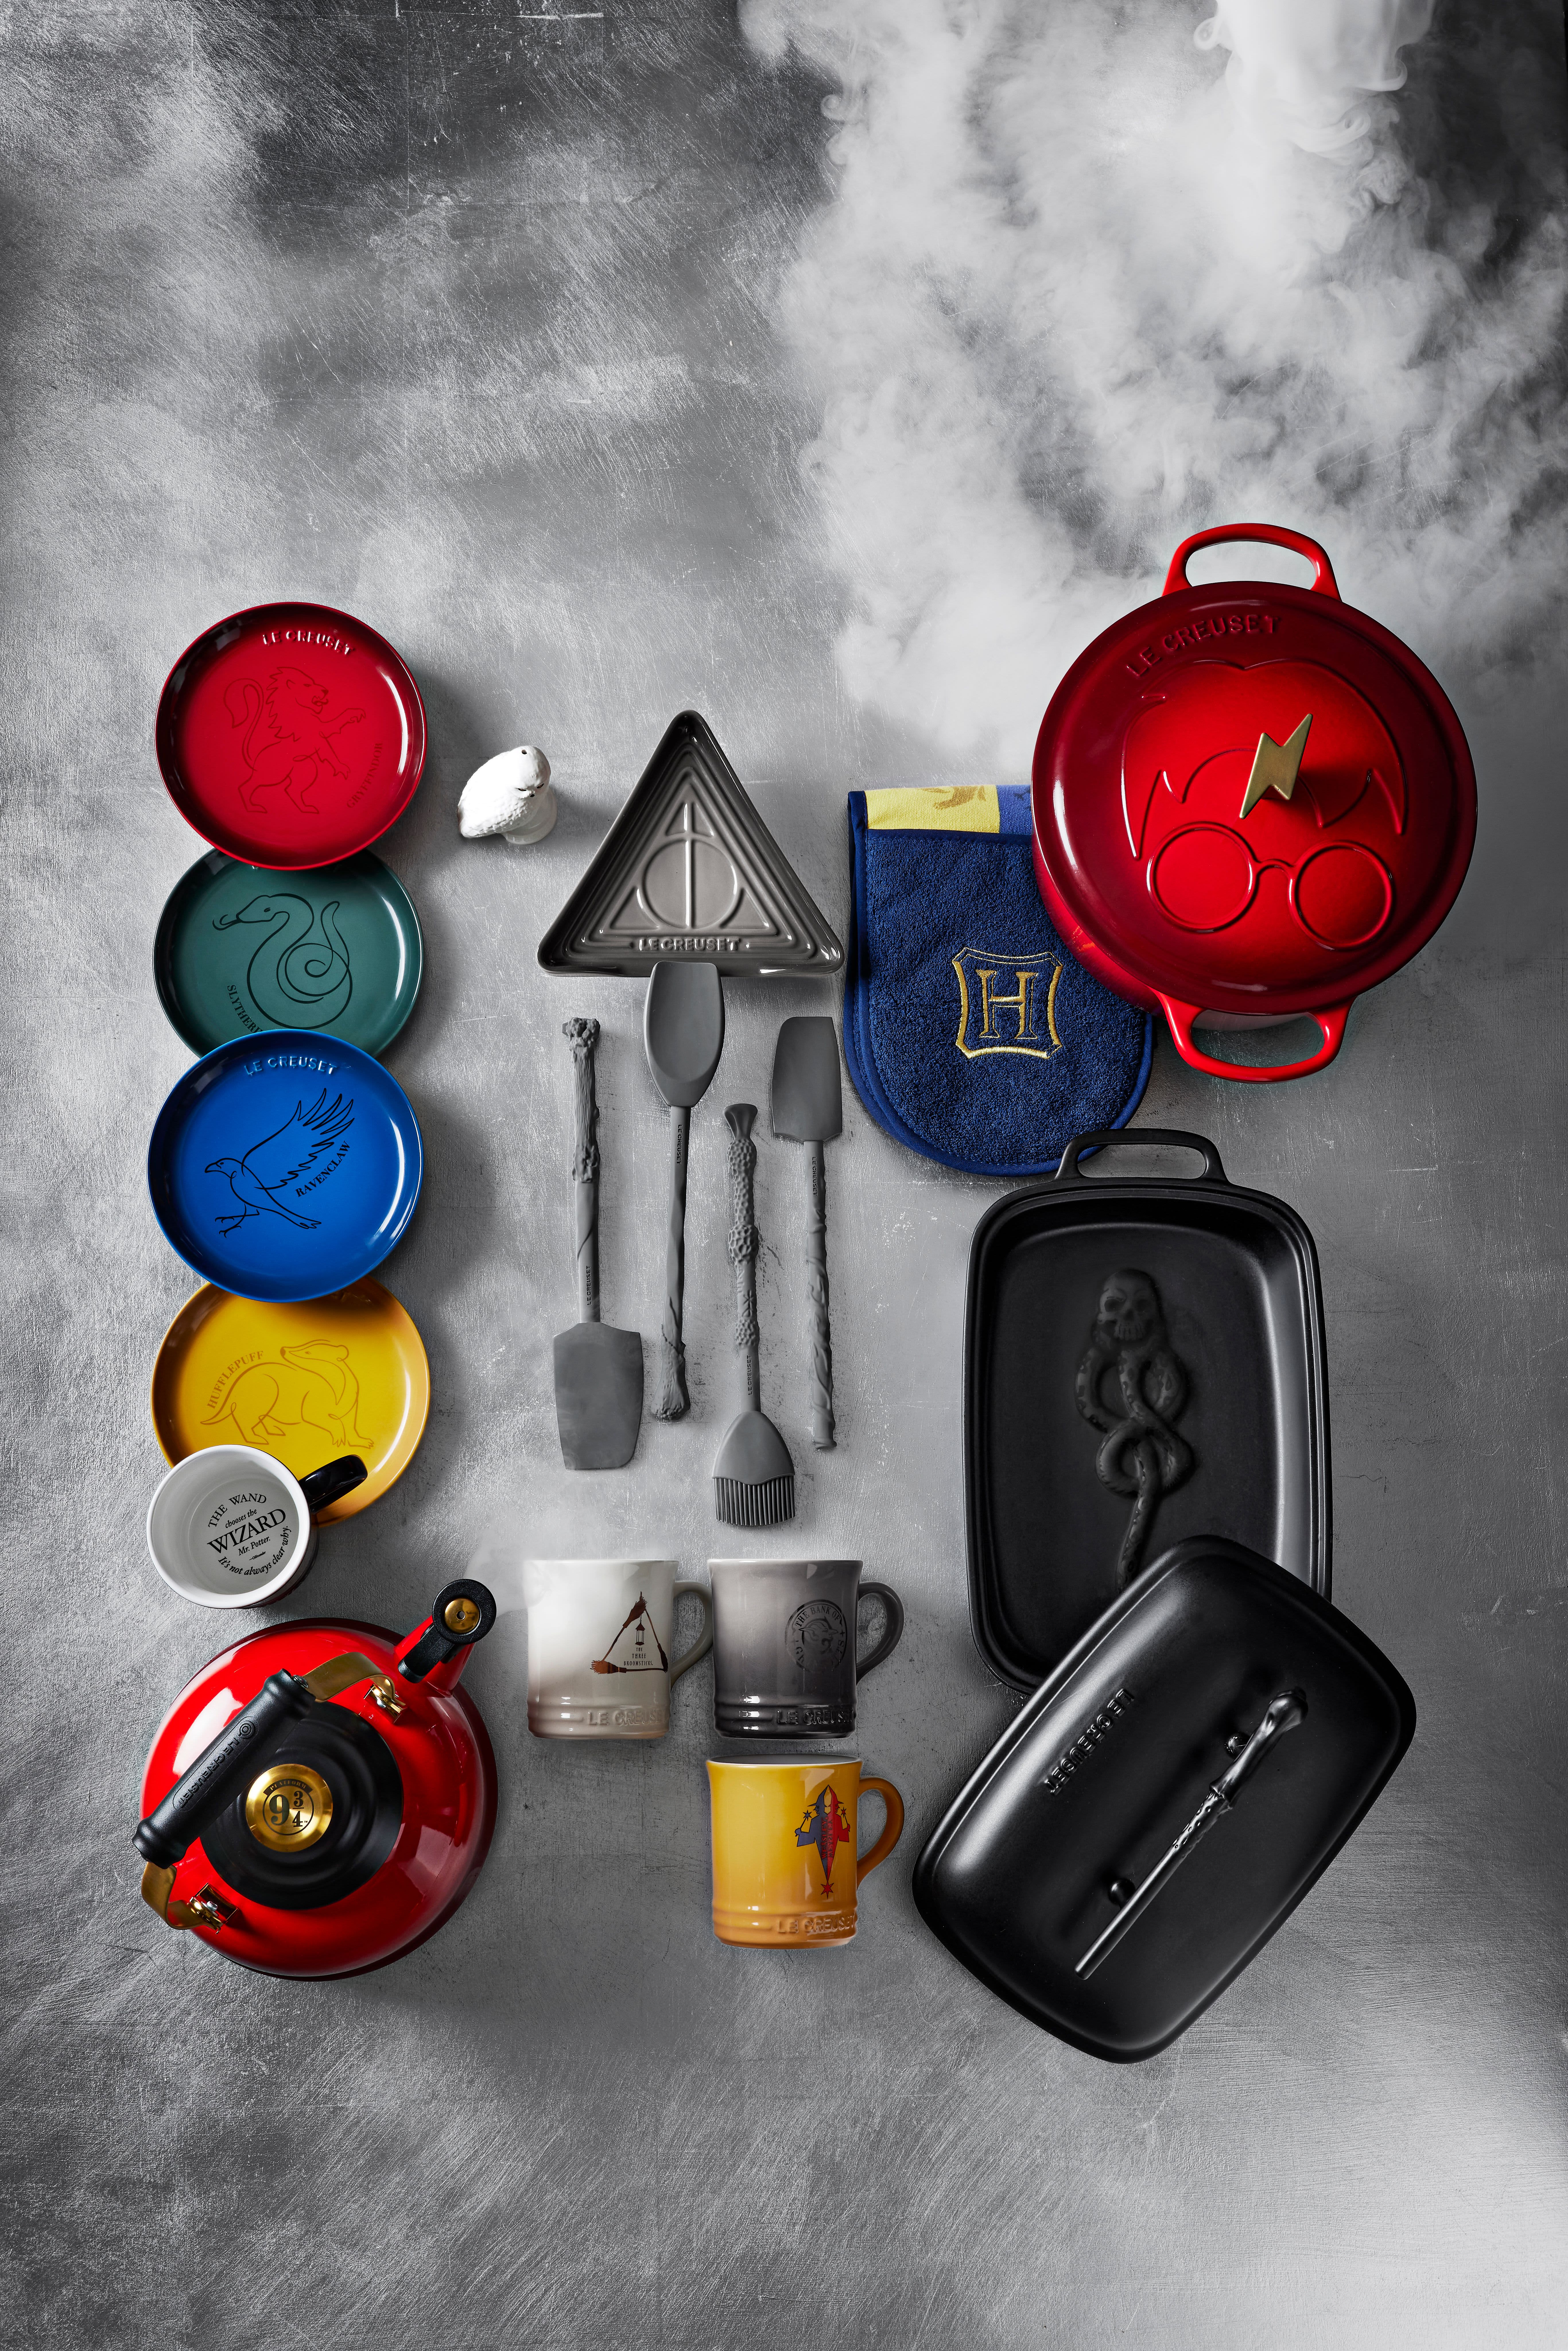 Harry Potter Le Creuset Collection Launches at Williams Sonoma